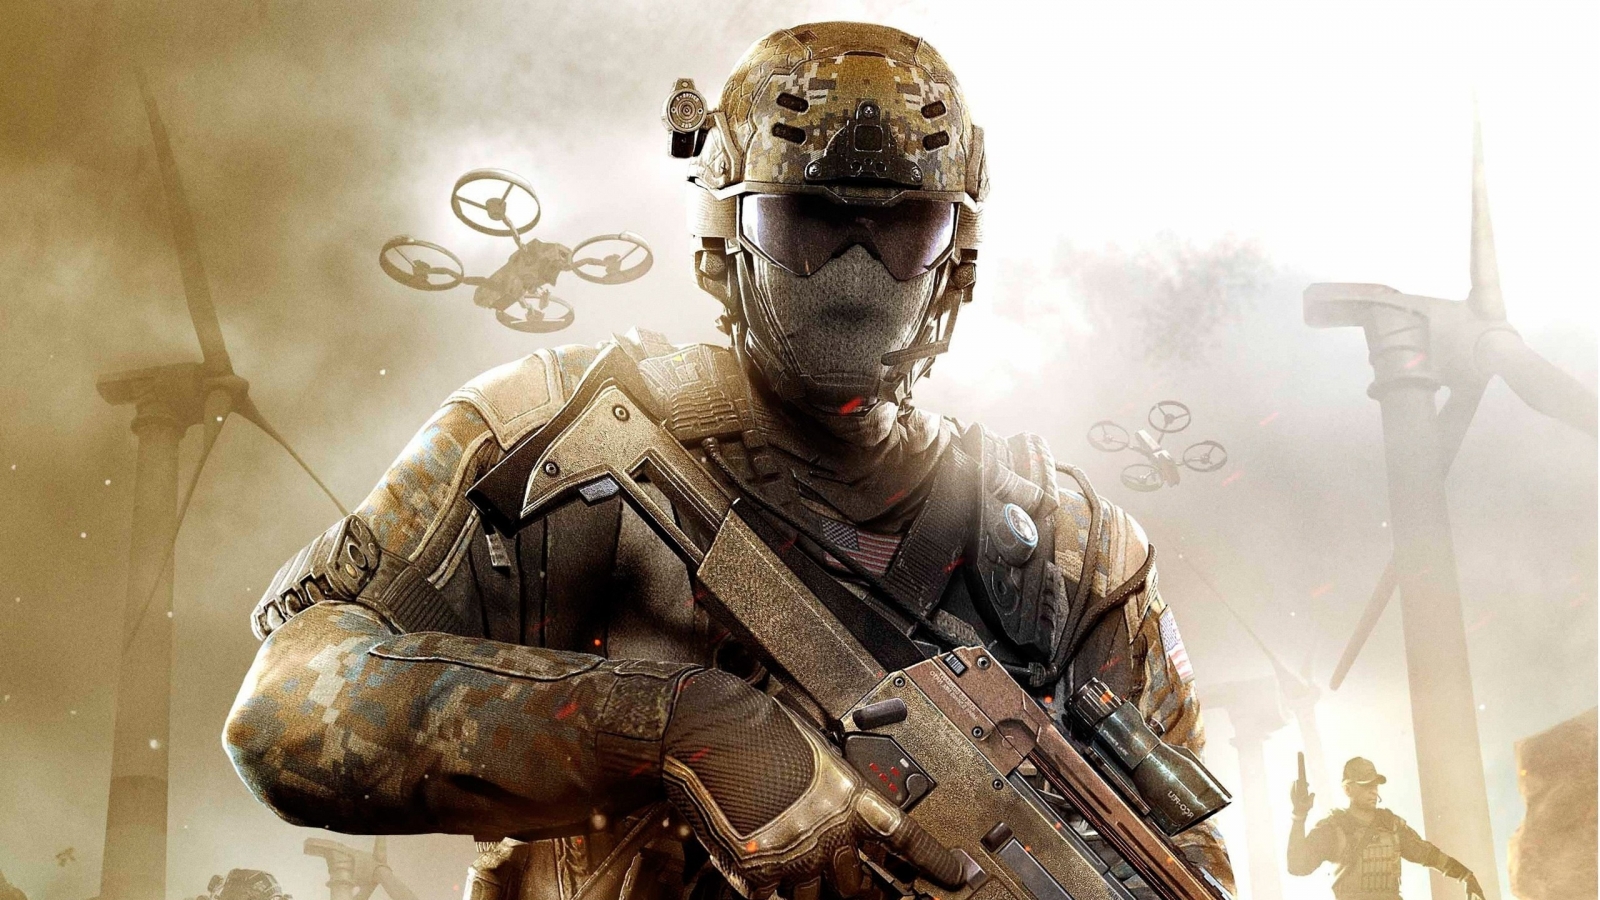 Call of Duty Black Ops 2 Soldier for 1600 x 900 HDTV resolution